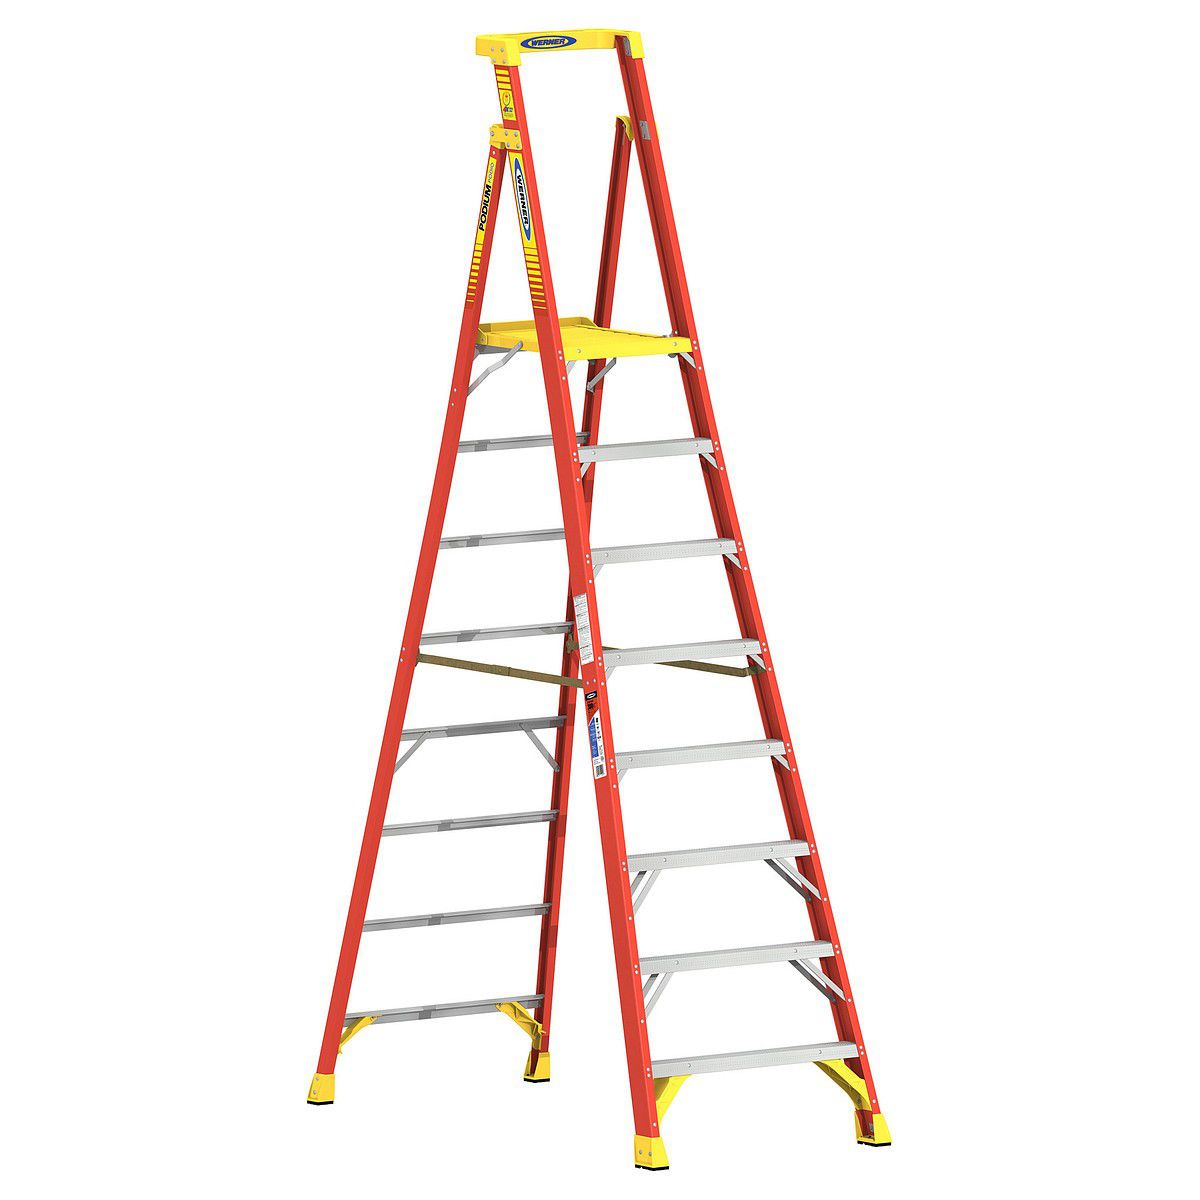 WERNER 10 ft. Reach Fiberglass Podium Ladder with 300 lb. Load Capacity Type IA Duty Rating